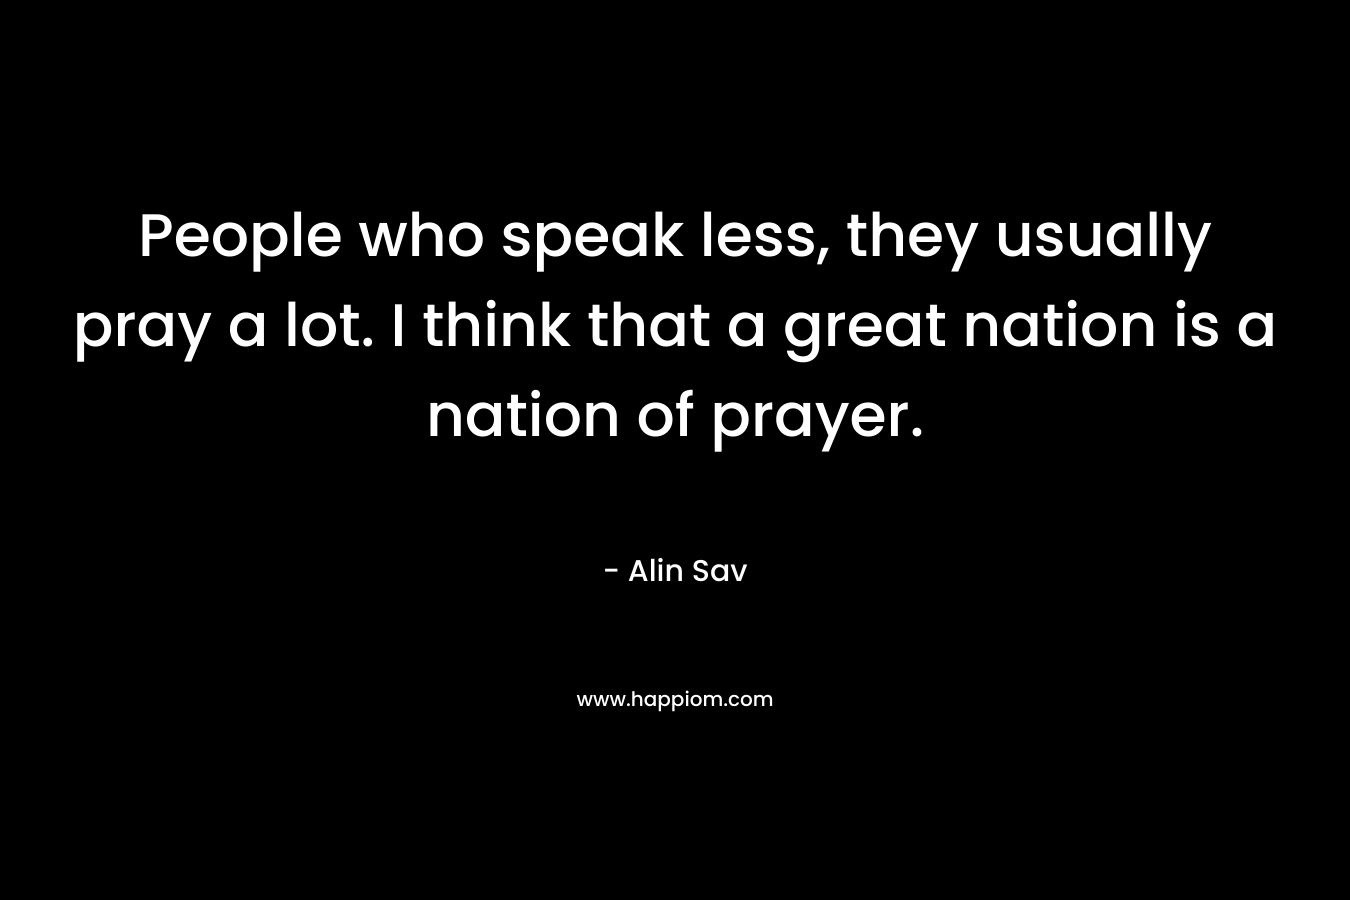 People who speak less, they usually pray a lot. I think that a great nation is a nation of prayer.